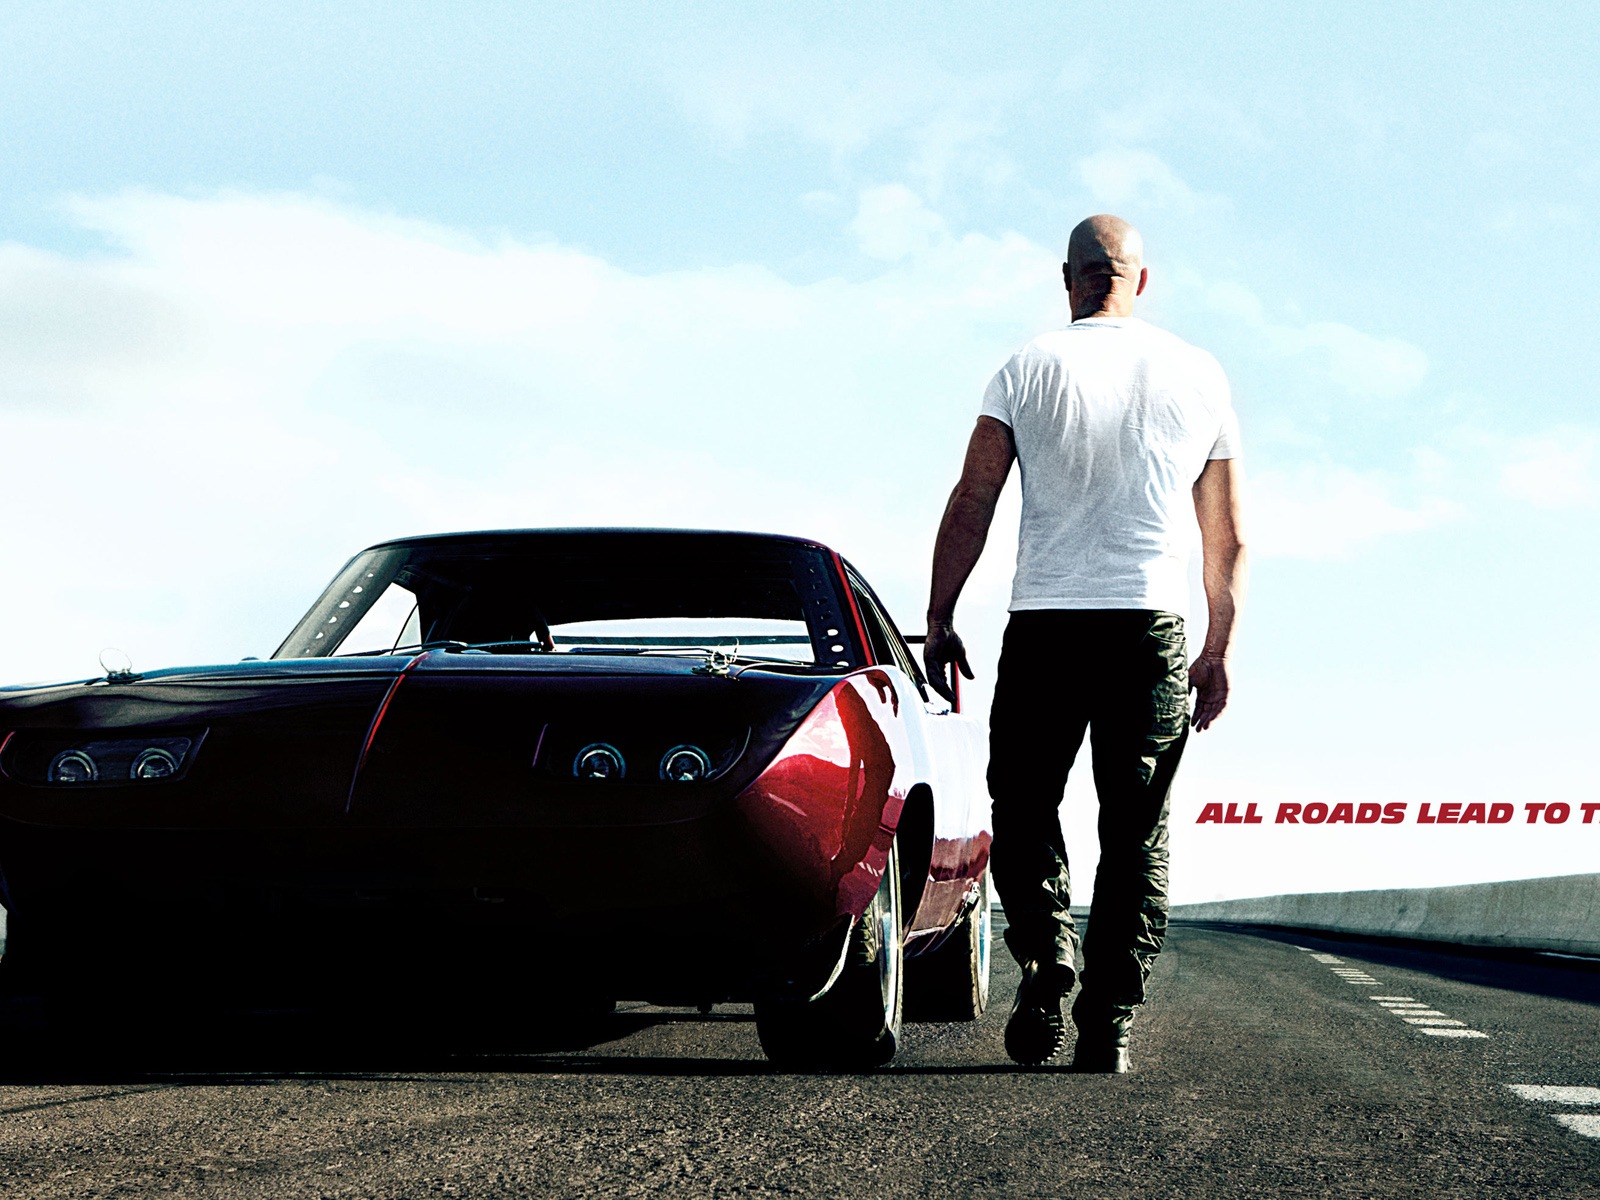 Fast And Furious 6 HD movie wallpapers #11 - 1600x1200